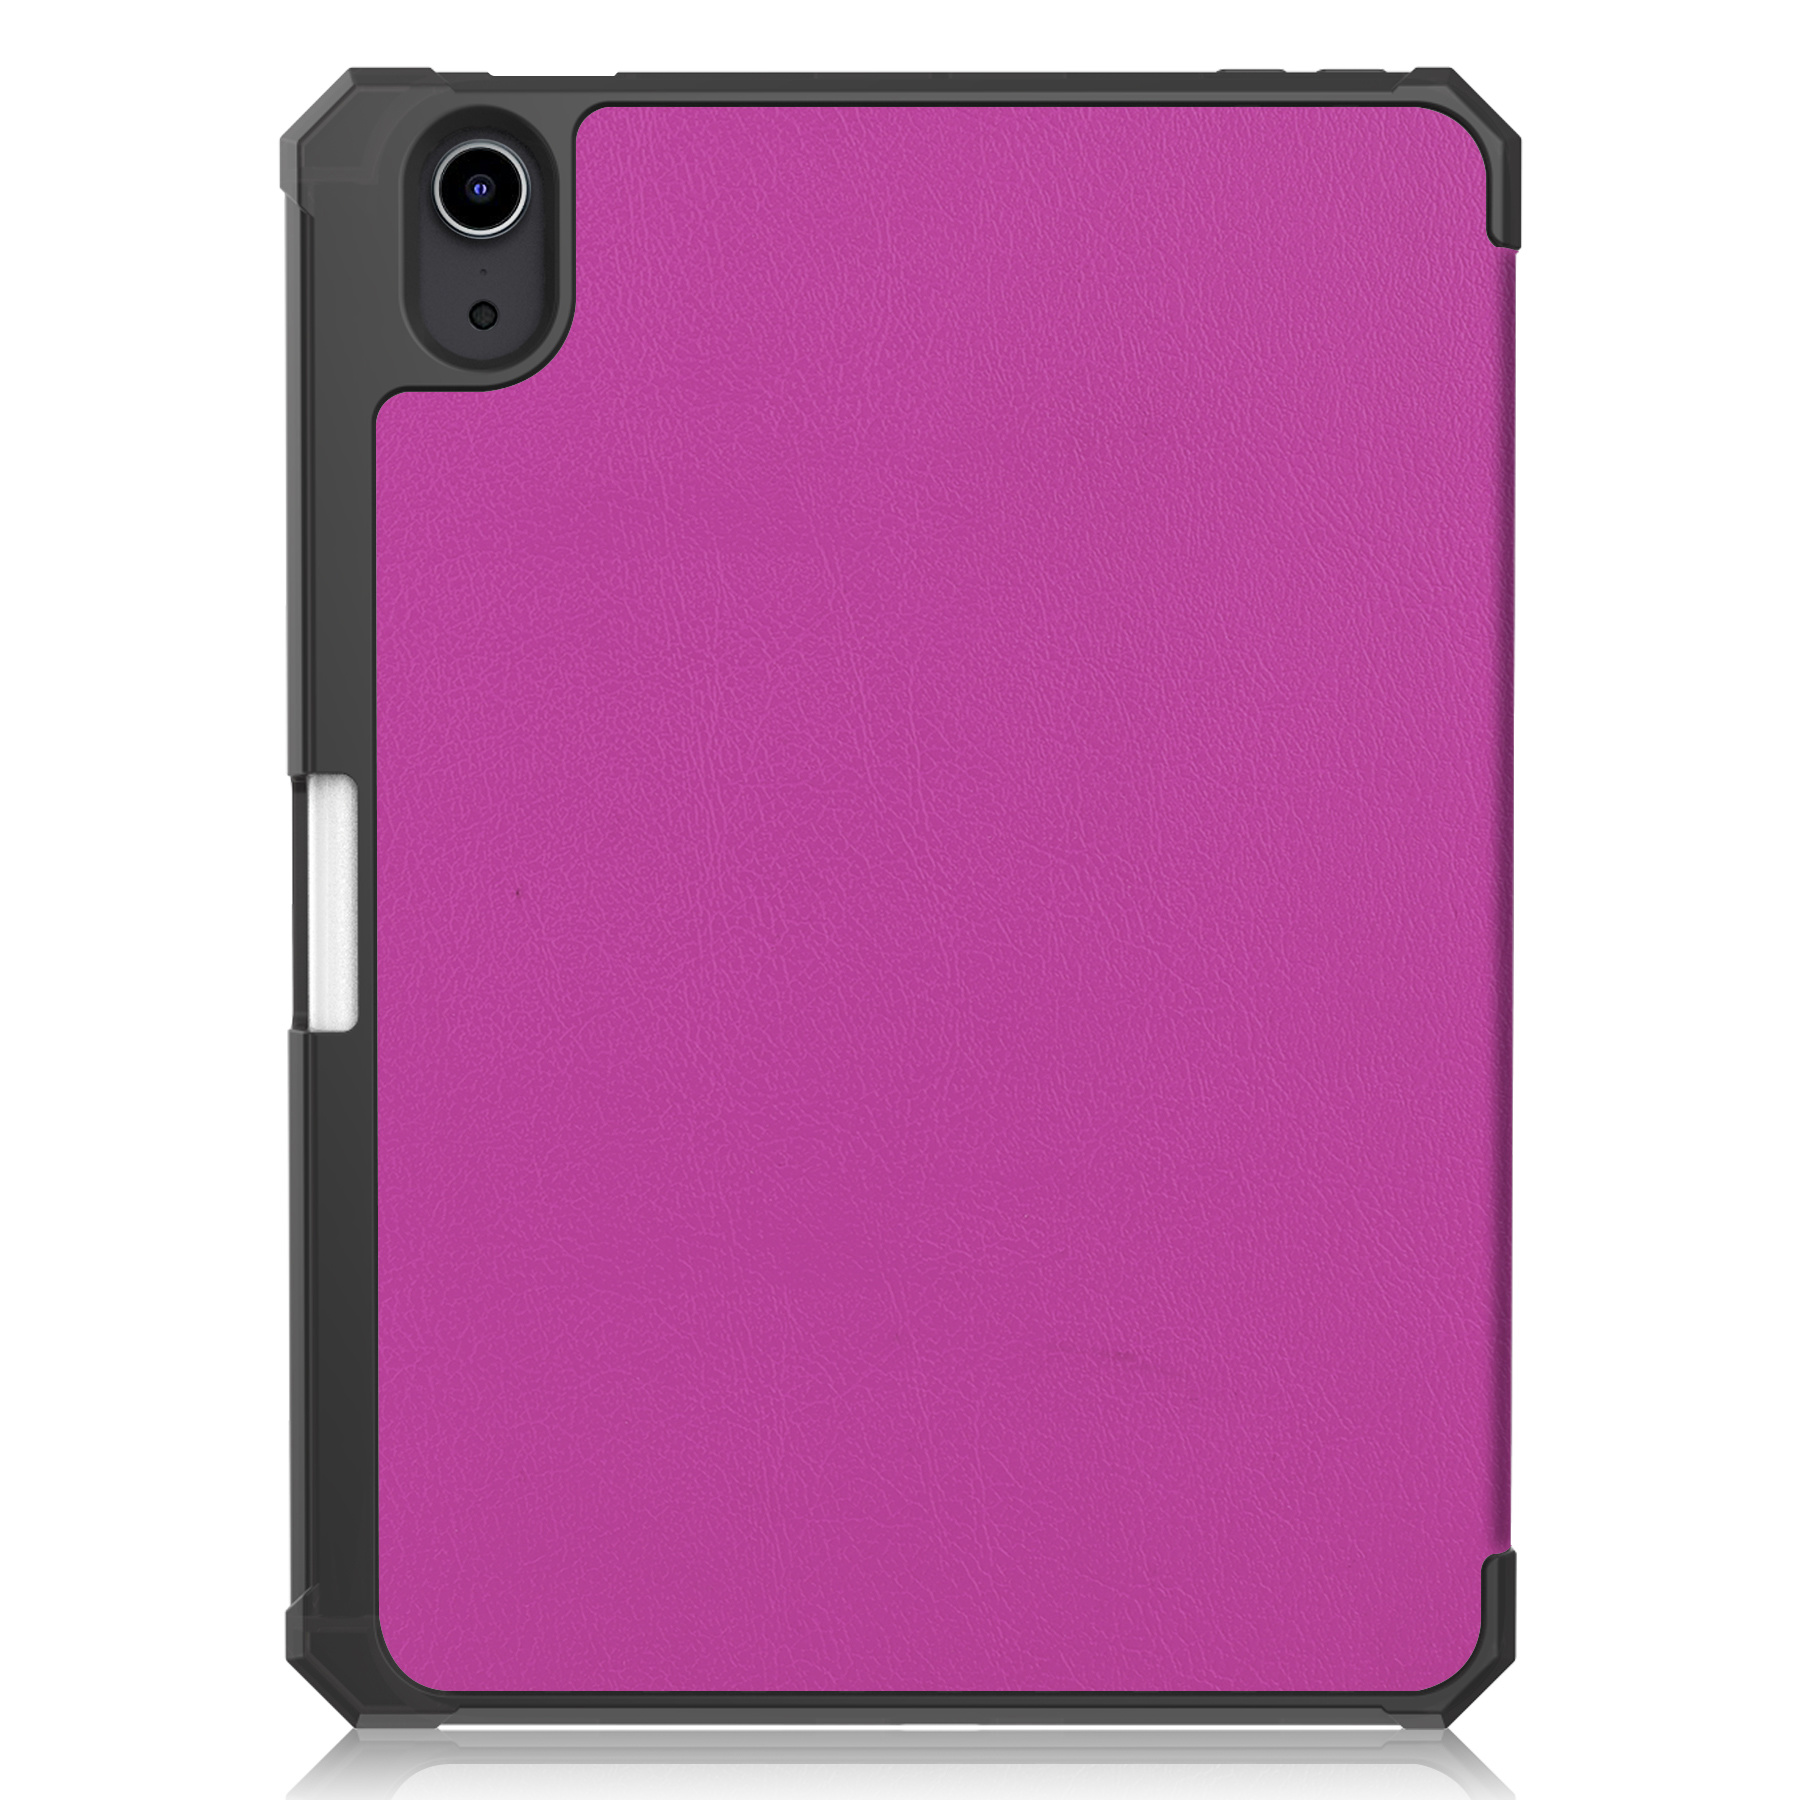 Nomfy iPad Mini 6 Hoesje Case Paars - Hoes Met Uitsparing Apple Pencil - iPad Mini 6 Hoes Hardcover Hoesje Paars Bookcase